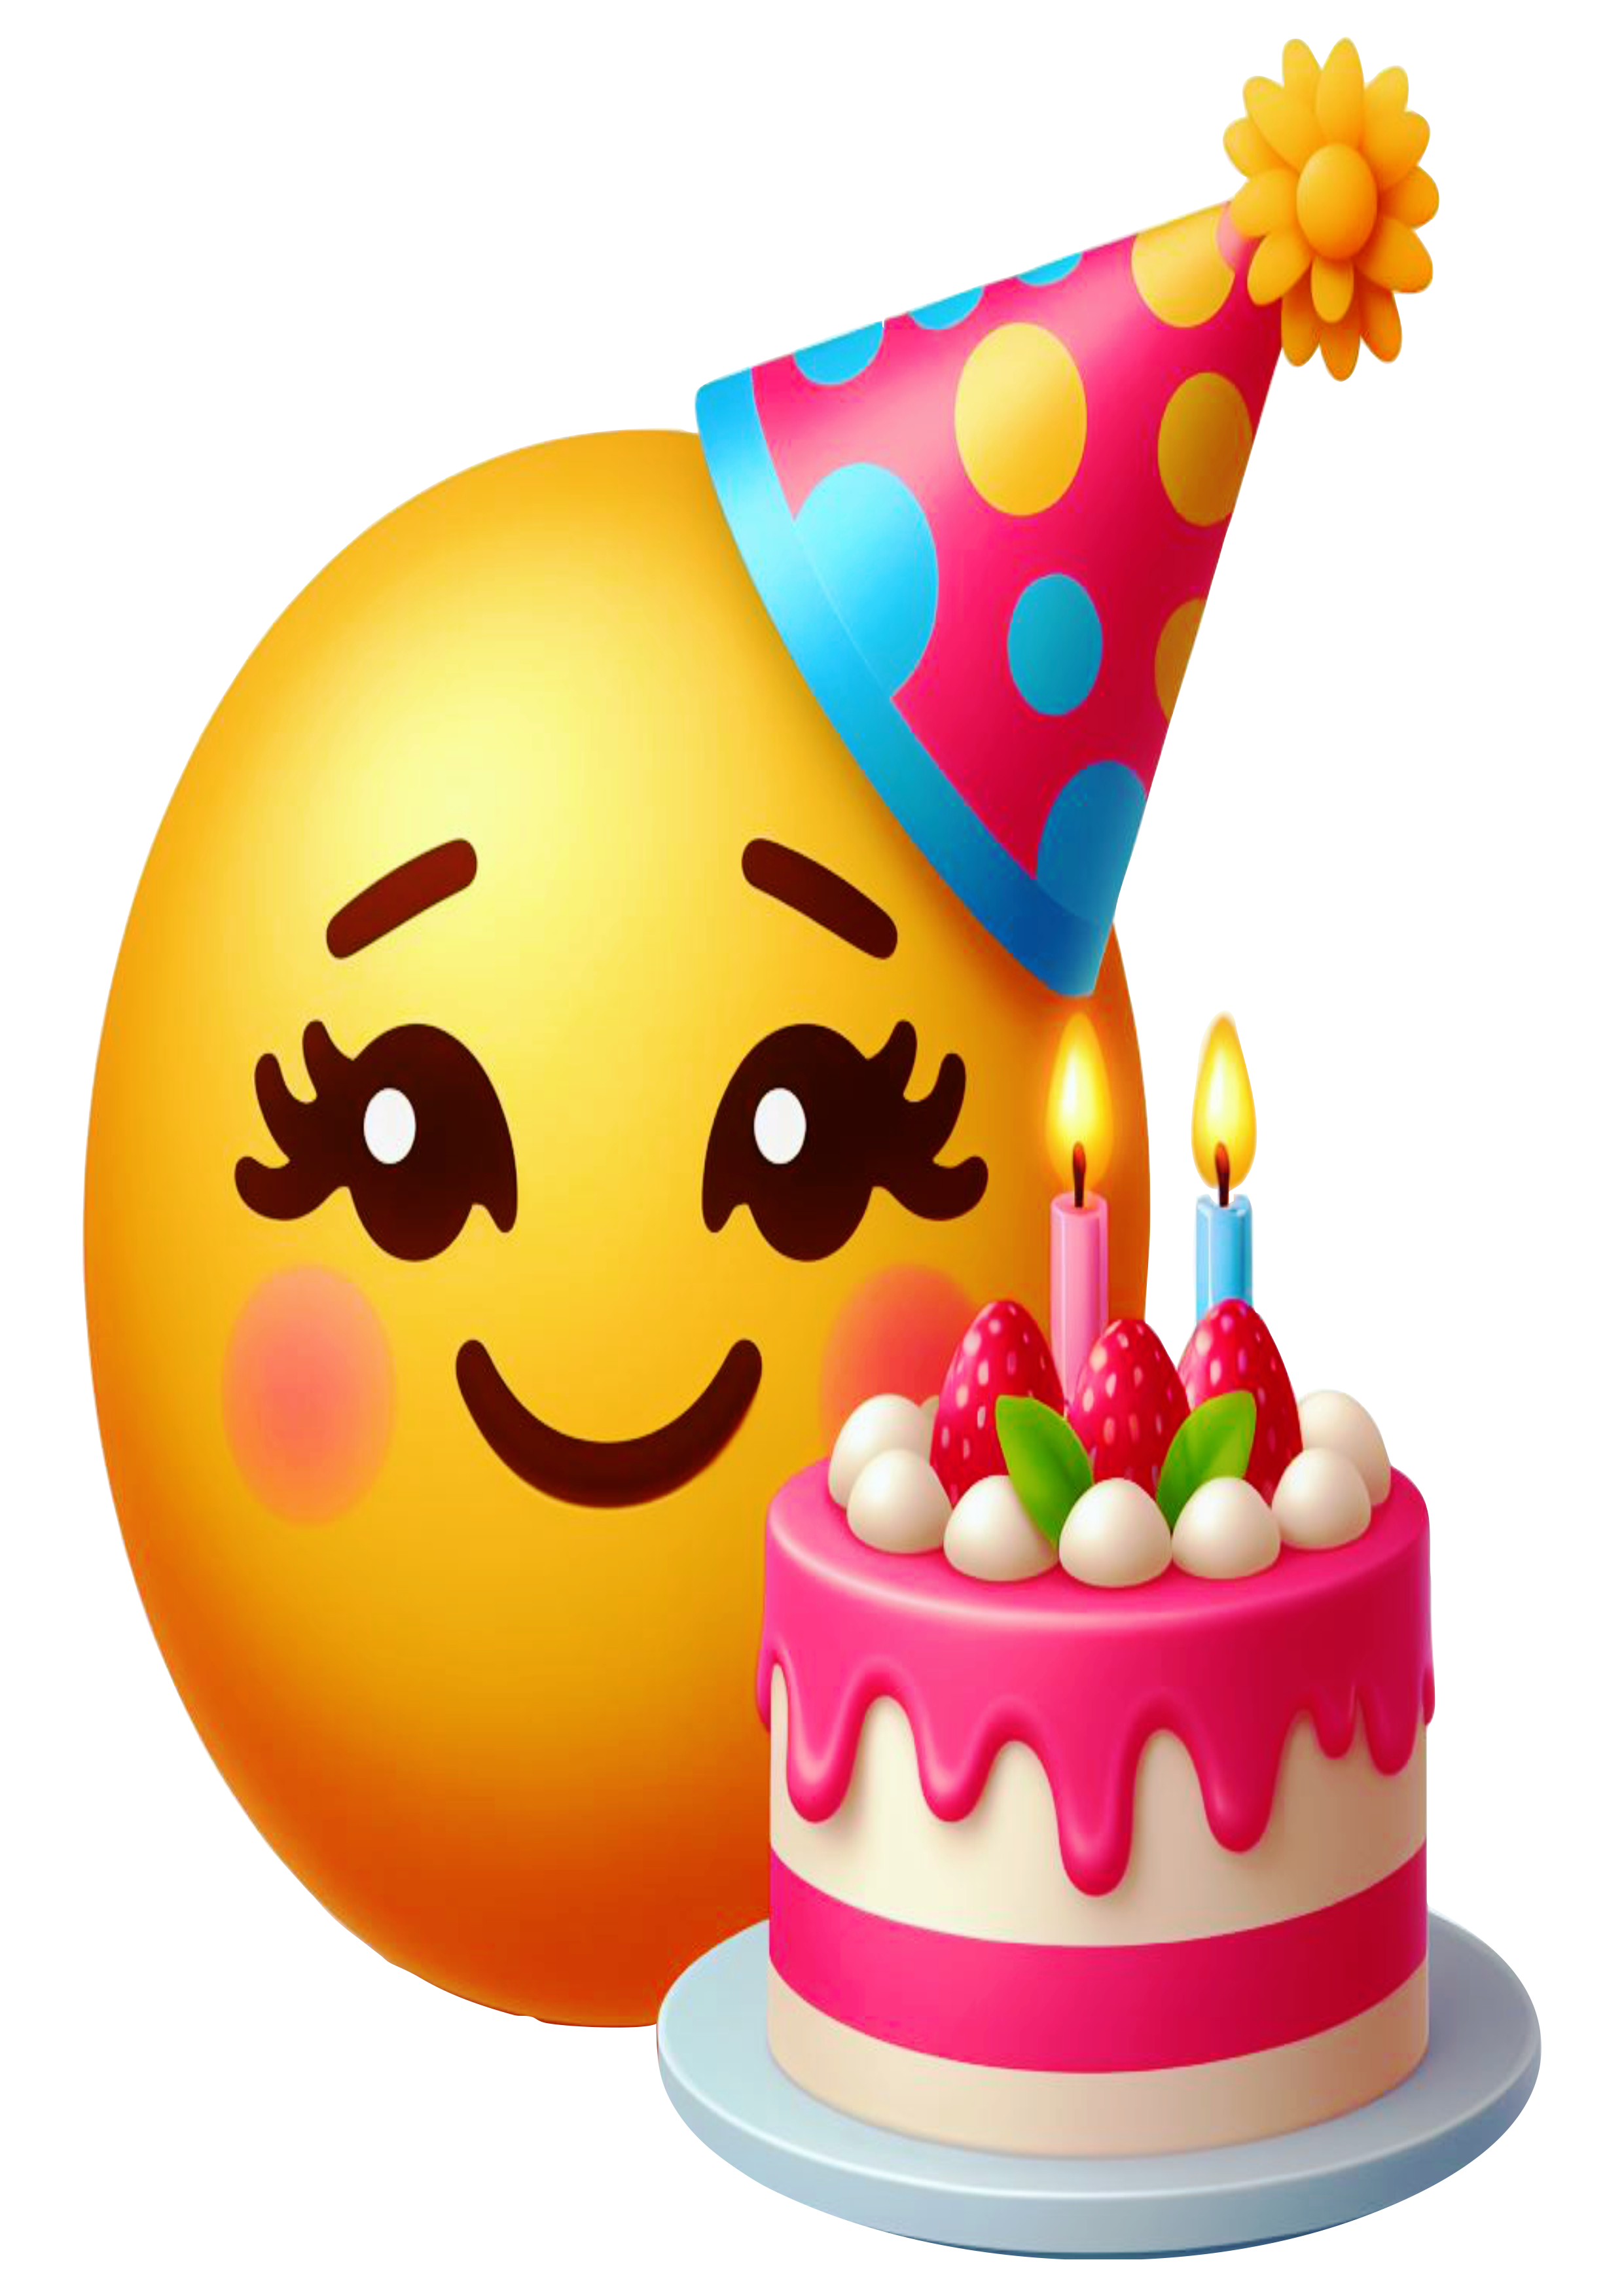 Birthday emoji png sticker for whatsapp party decoration girly cake party emoticon free images